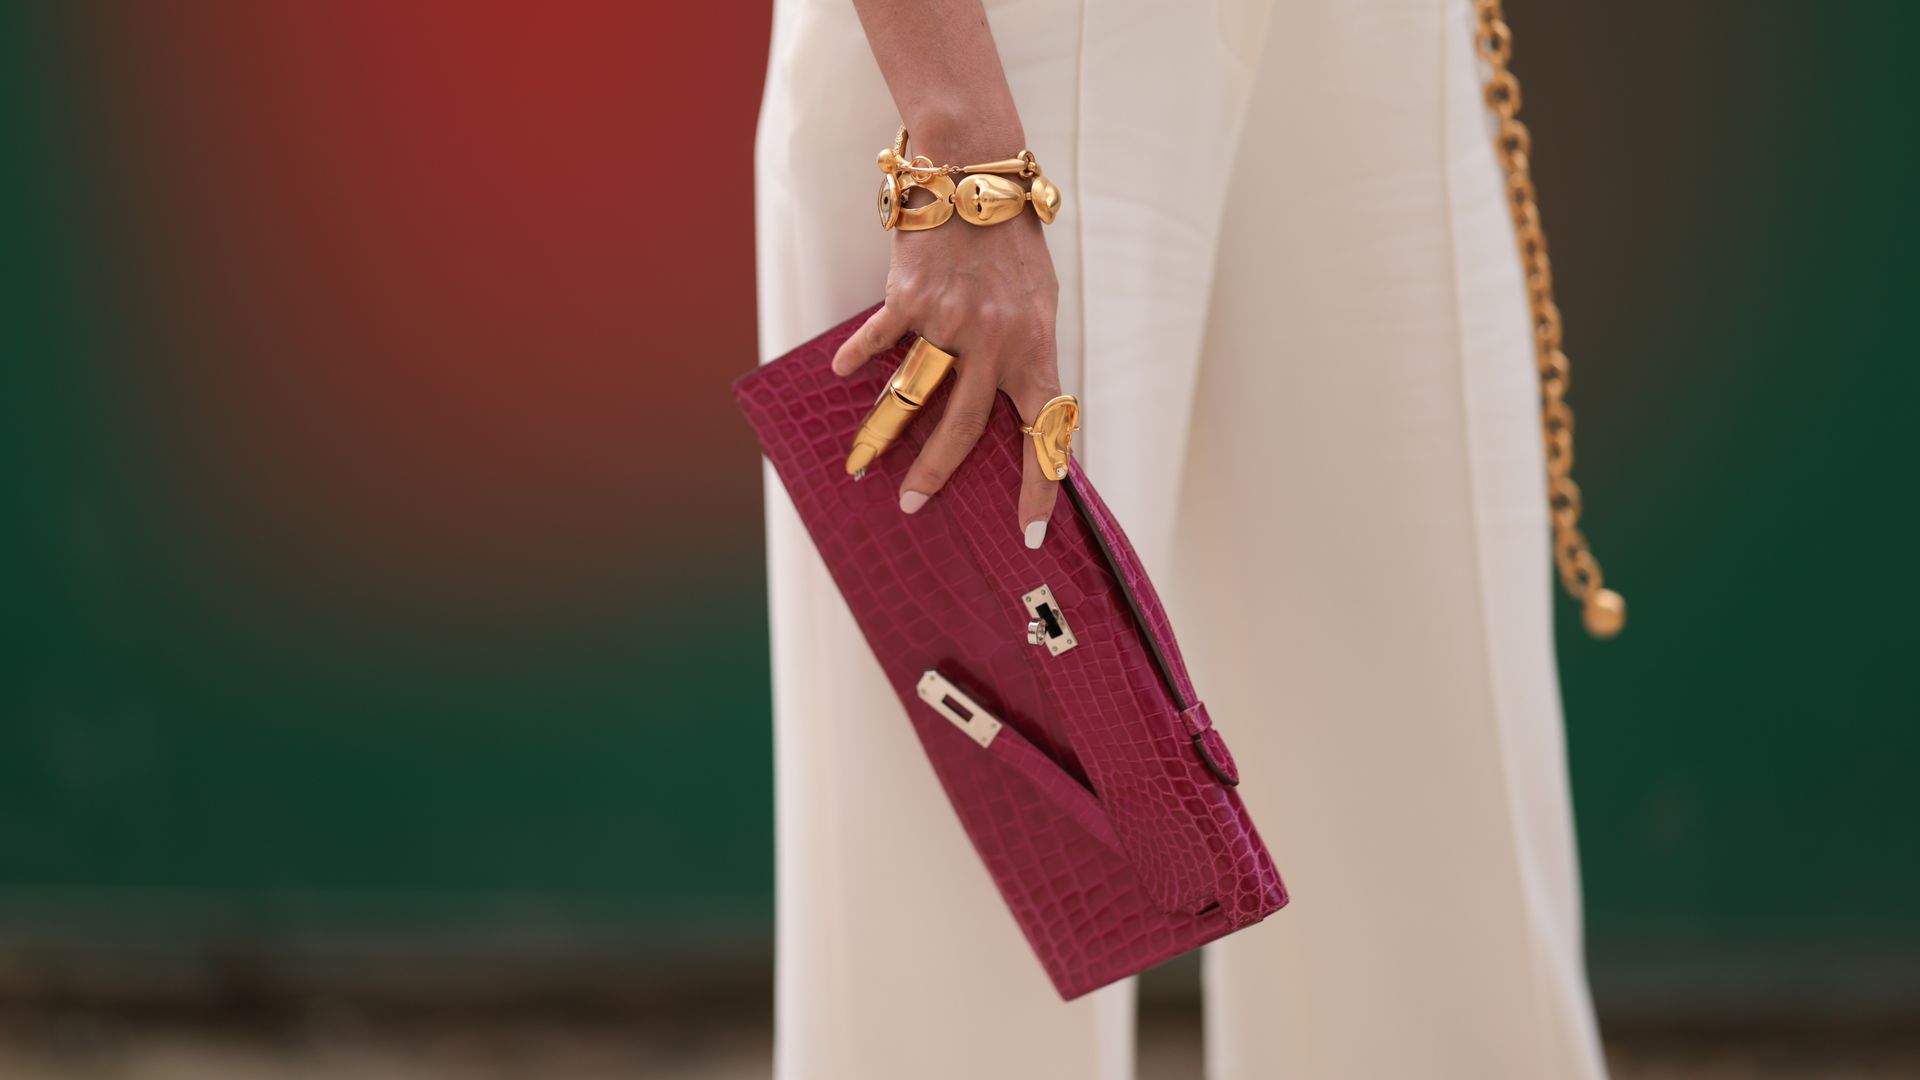 Woman wearing gold rings holding pink croc-effect clutch